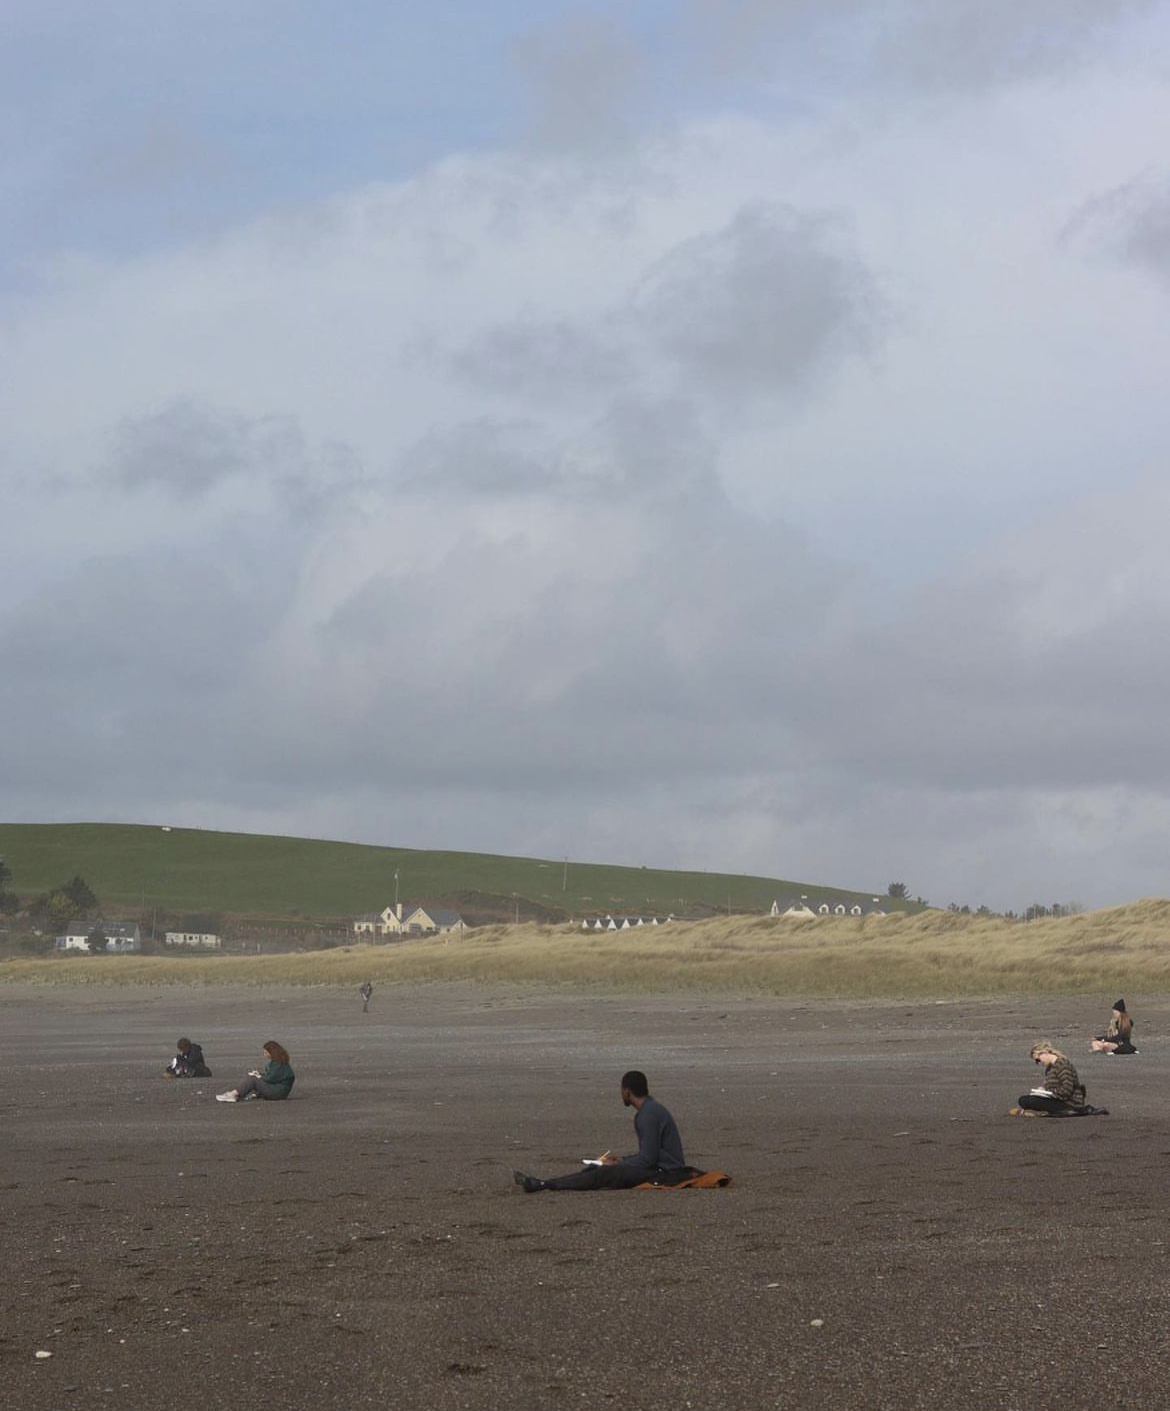 This photo is from our Writer's Retreat in Clonakilty, Ireland. Our professor Stephen had us all sit on the beach and write anything that was inspiring us.